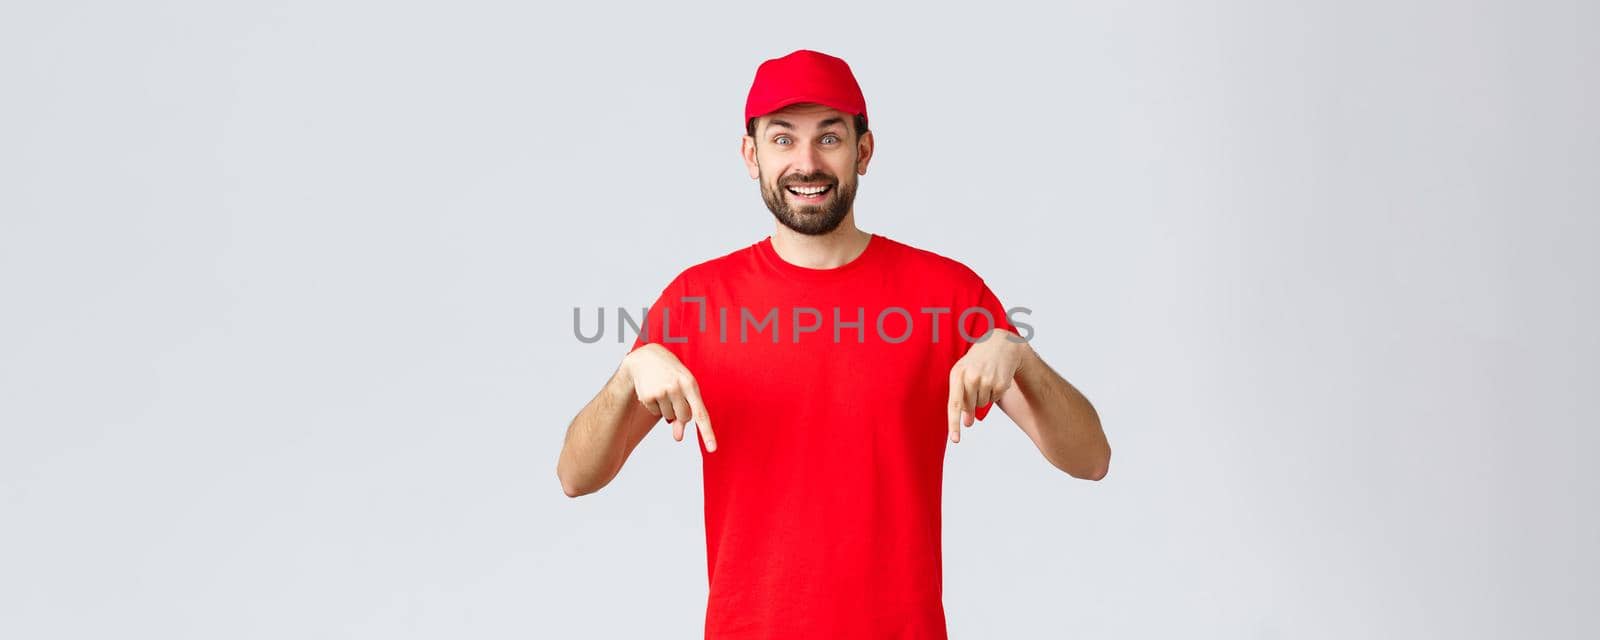 Online shopping, delivery during quarantine and takeaway concept. Cheerful smiling, amused courier in red uniform cap and t-shirt, excited about new promo, pointing fingers down, grey background.